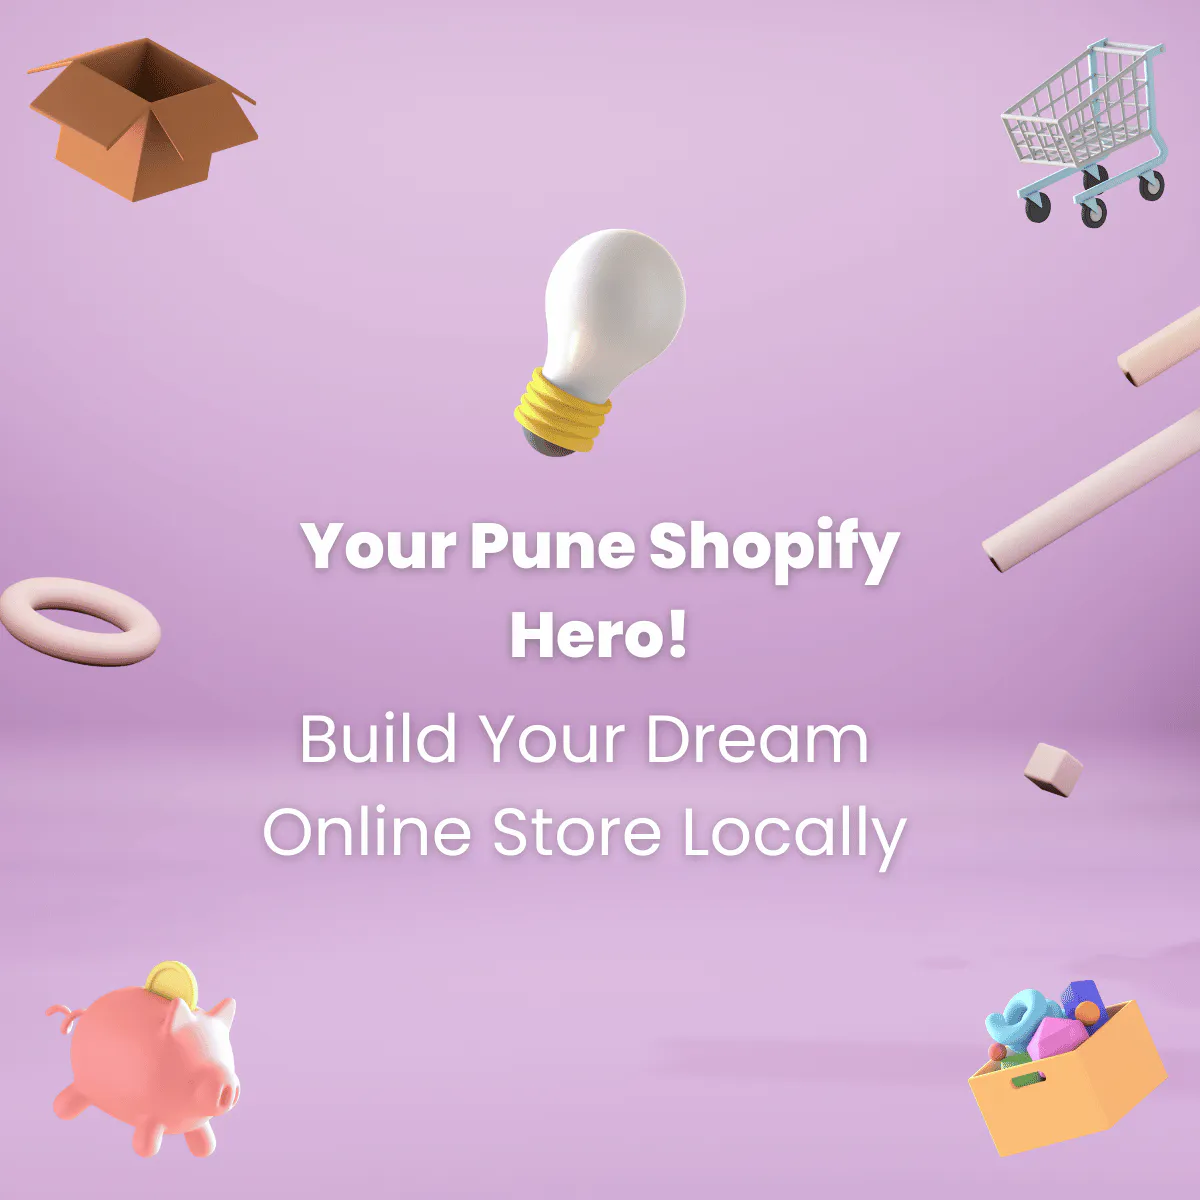 Your Pune Shopify Hero! Build Your Dream Online Store Locally